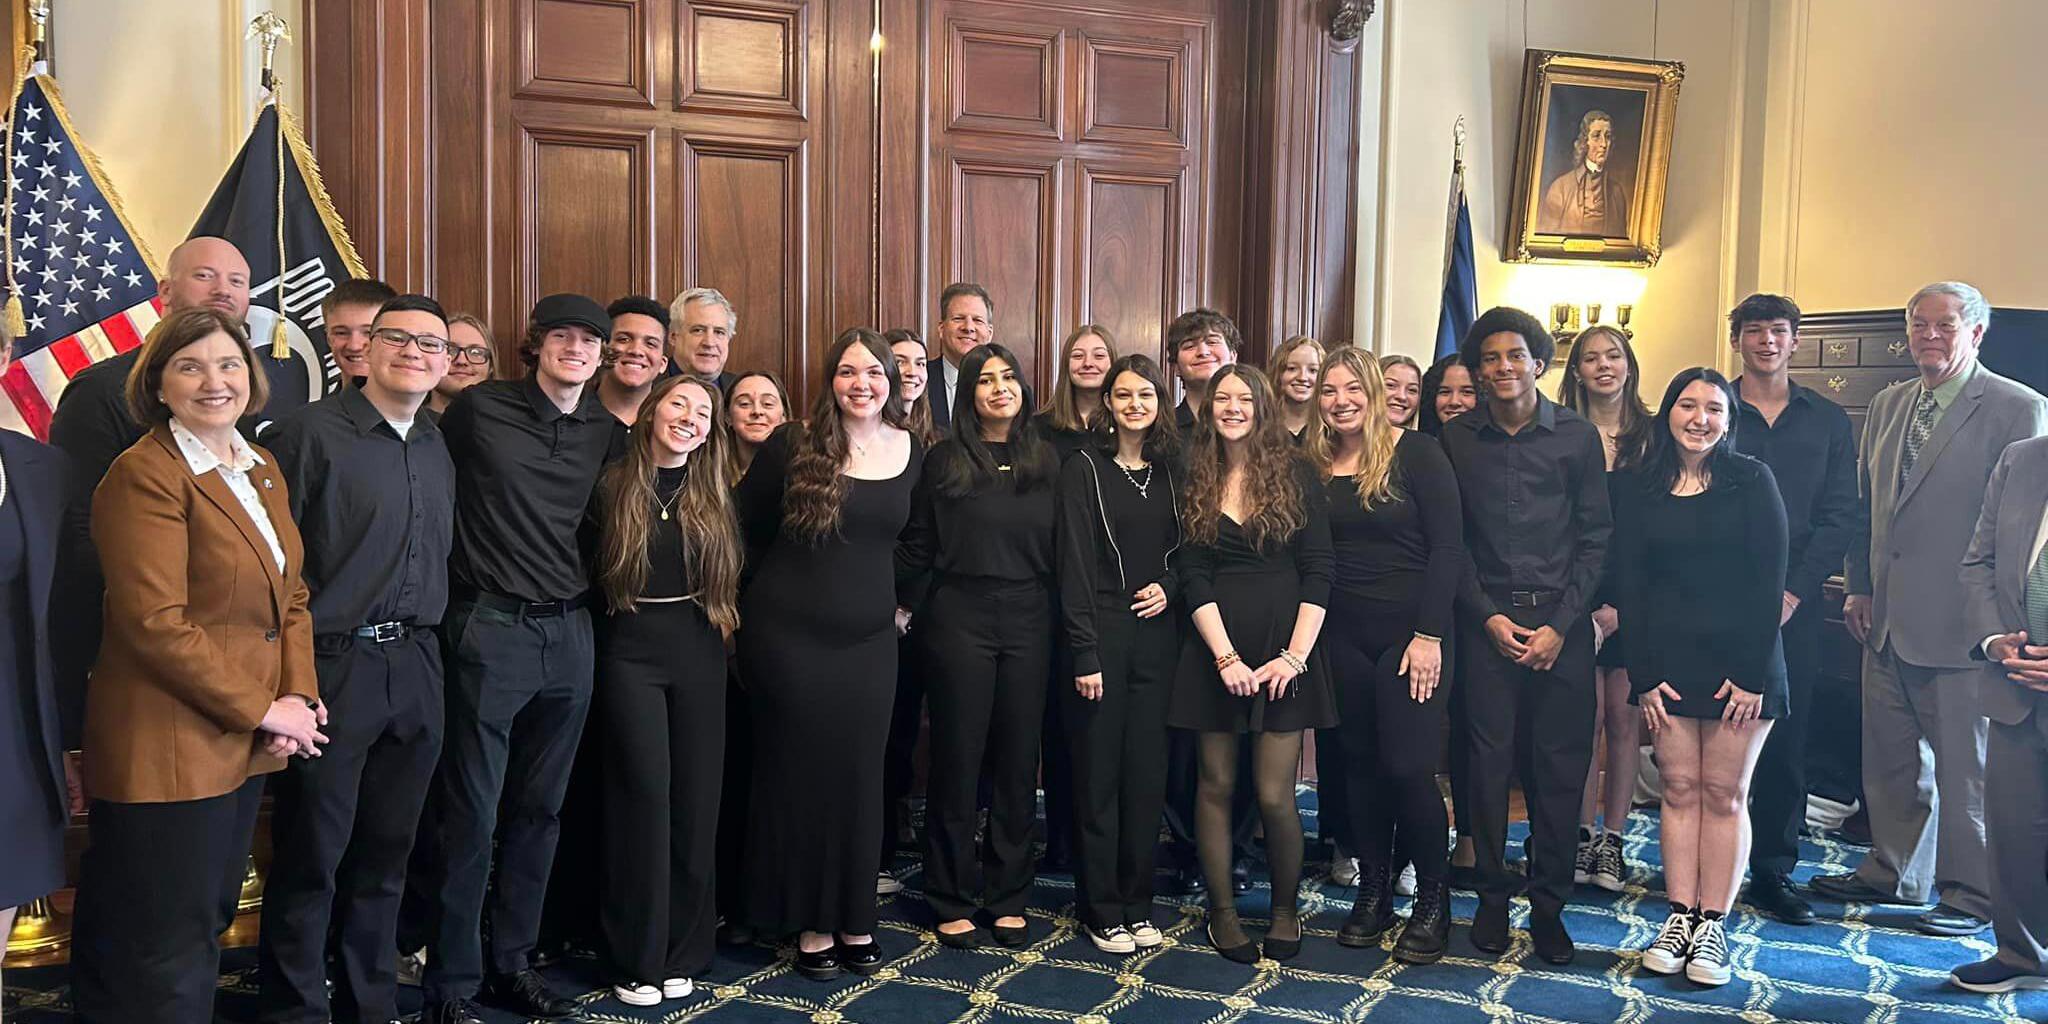 Alvirne High School Music performs at the State House!